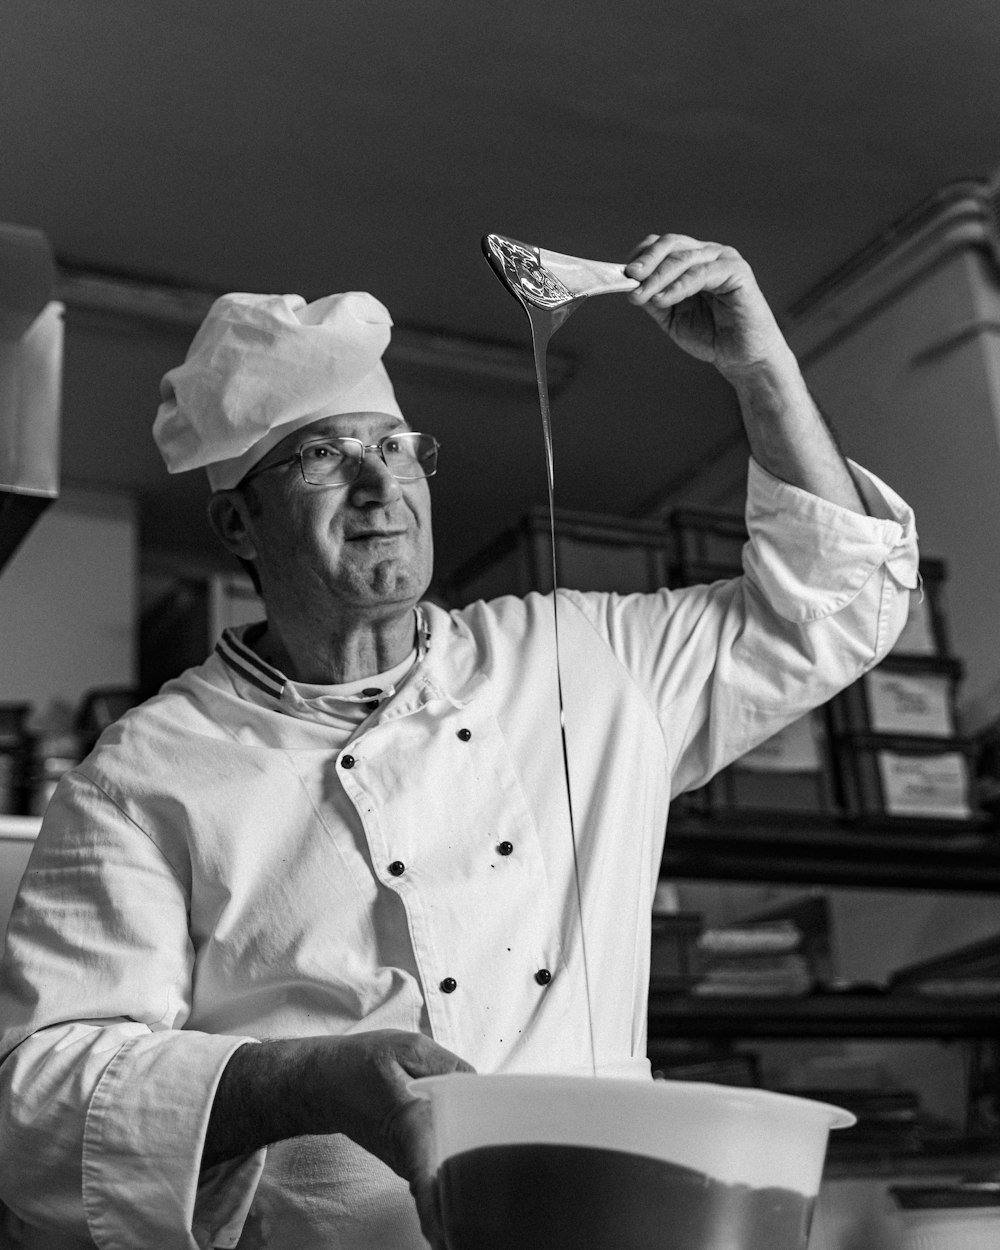 a man in a chef's uniform holding a spoon